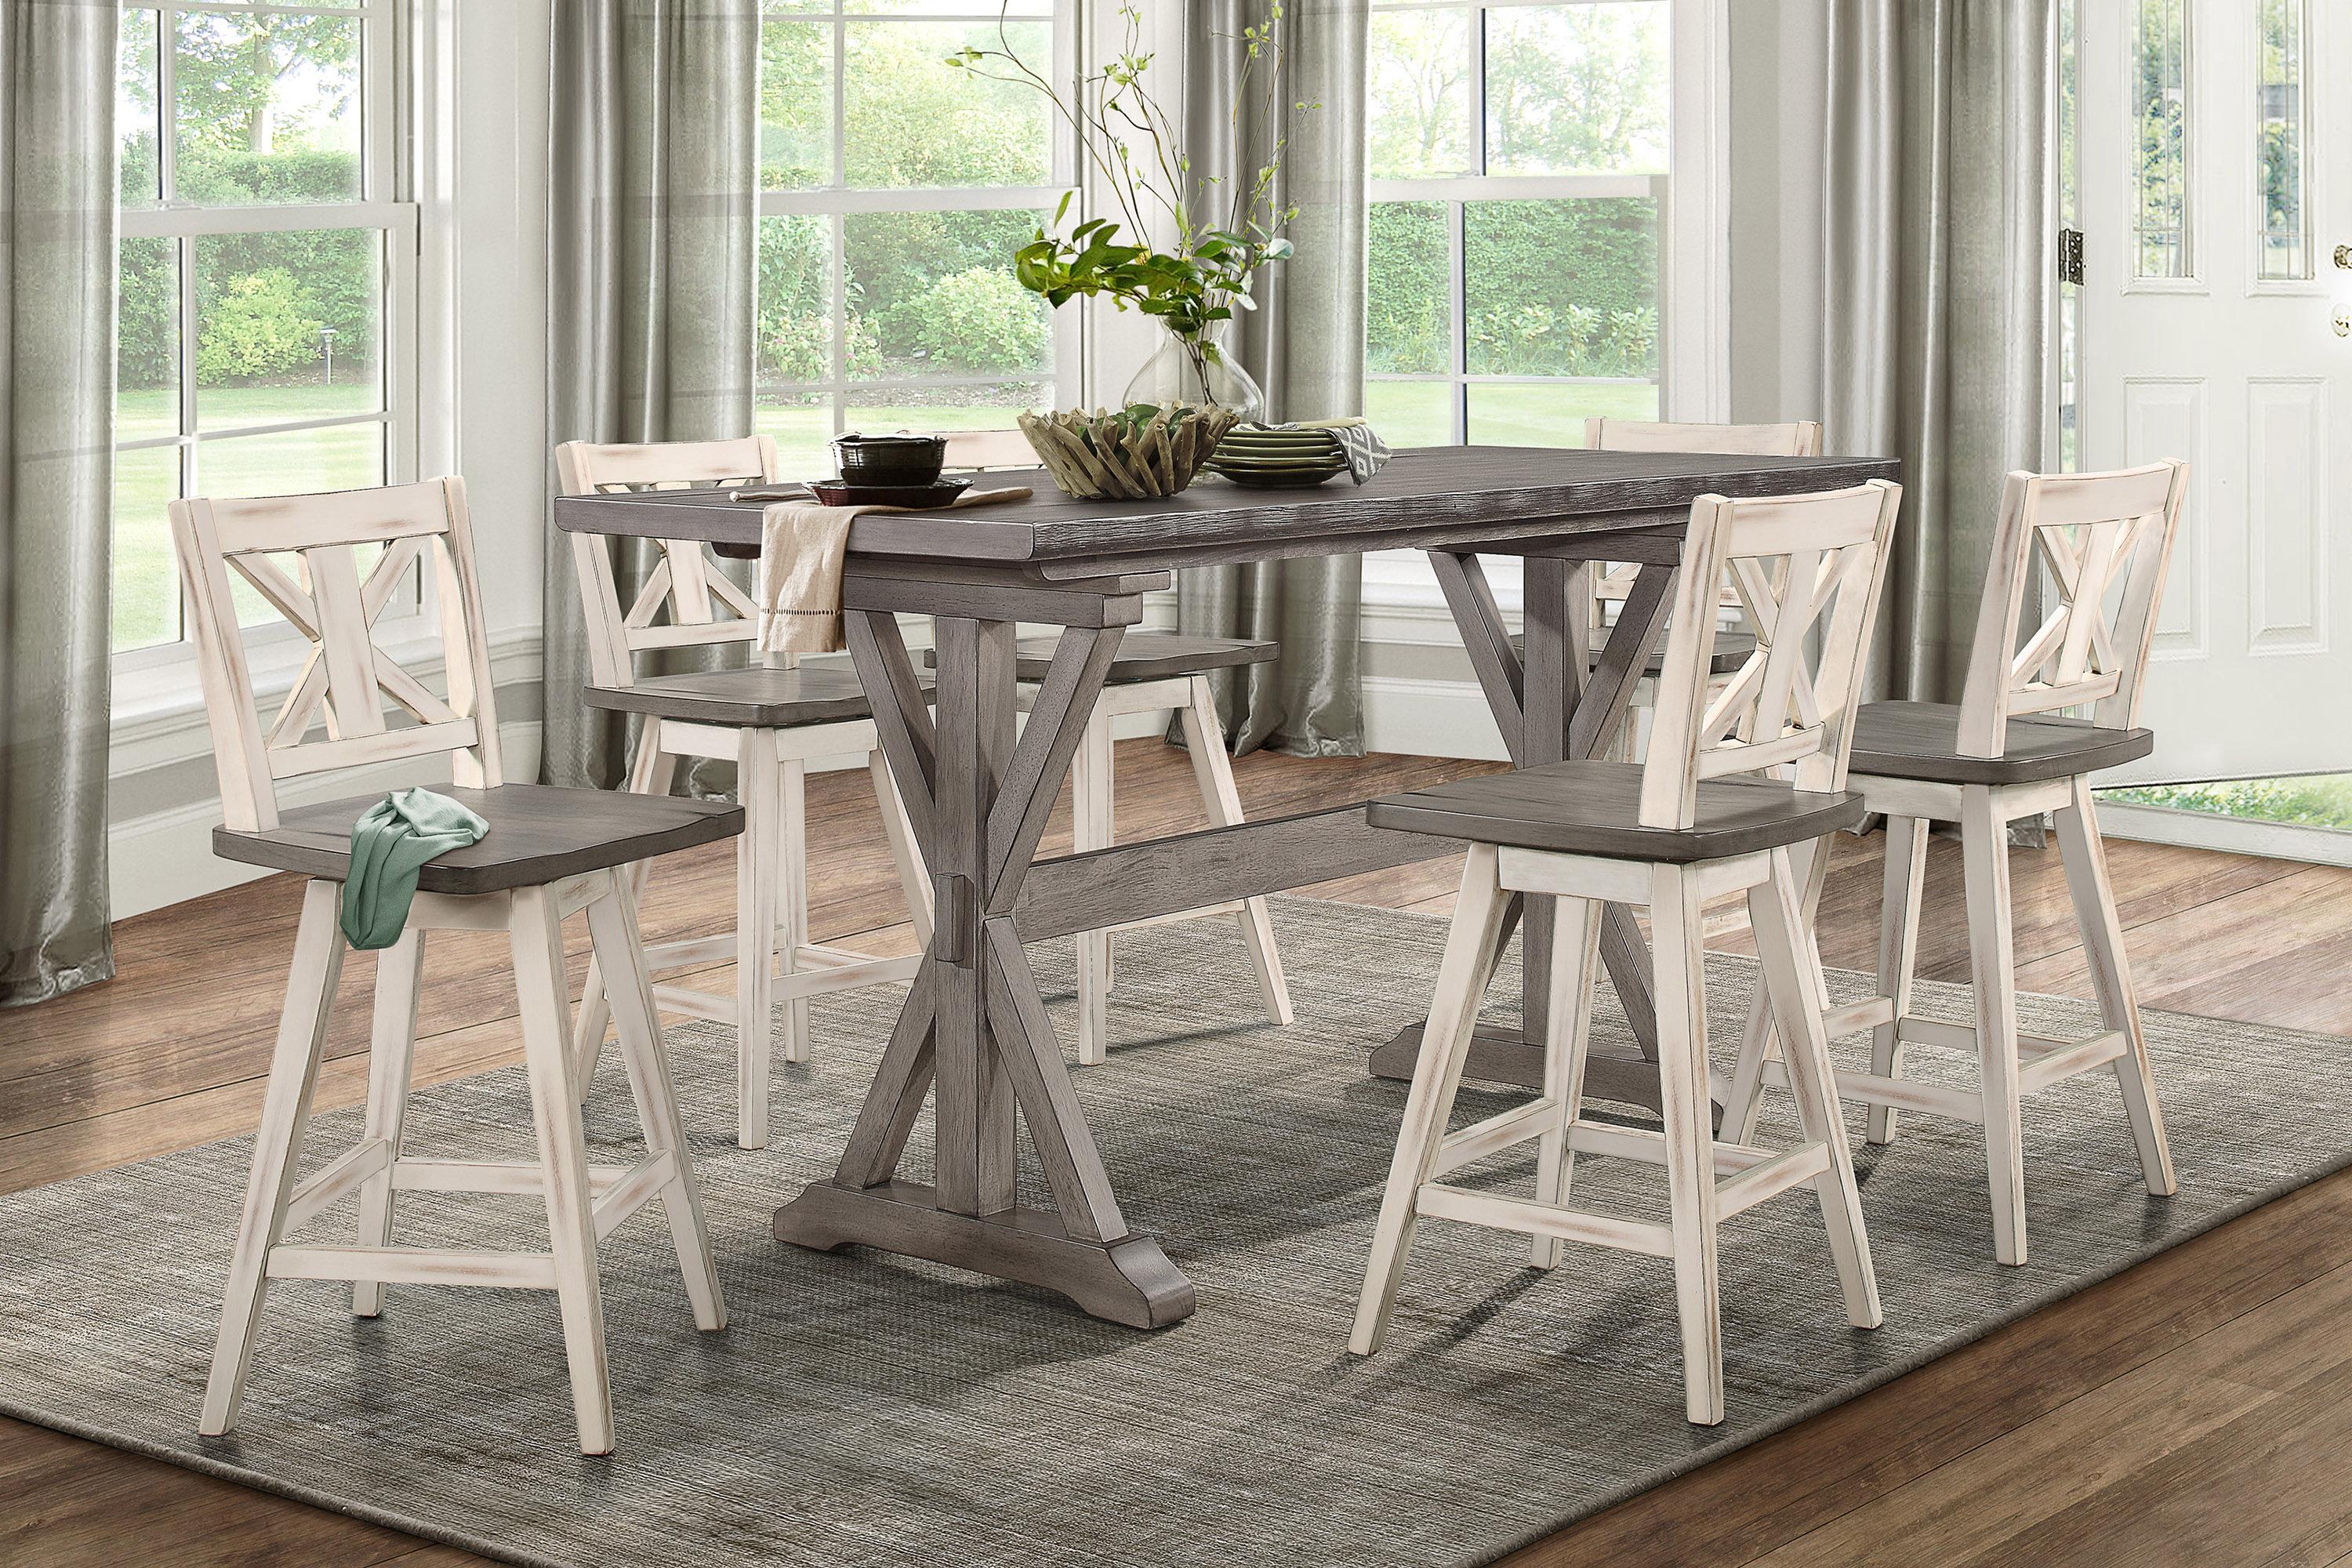 

    
Rustic Distressed Gray & White Solid Wood 29" Dining Room Set 7pcs Homelegance 5602-36-7PC Amsonia
